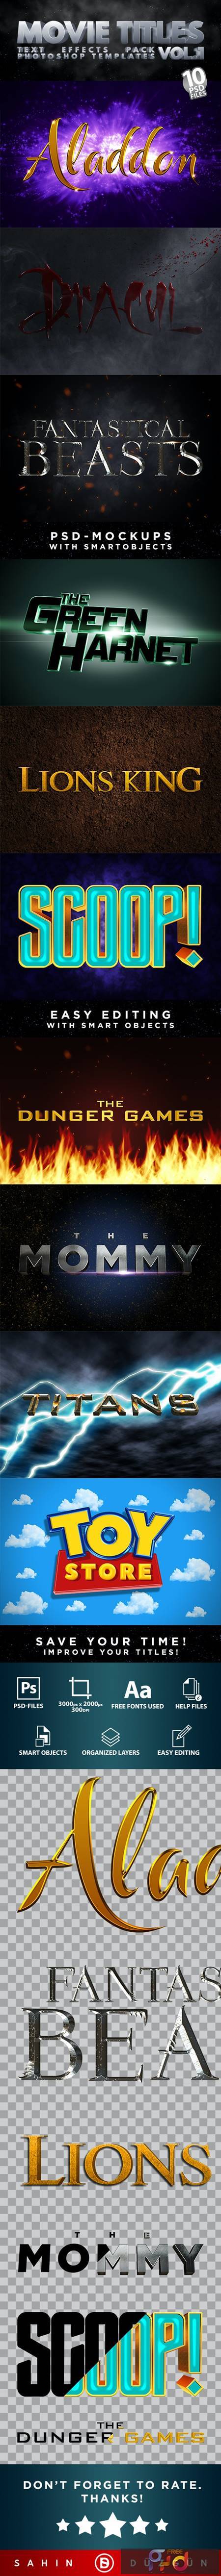 MOVIE TITLES   Vol.1   Text-Effects-Mockups   Template-Pack